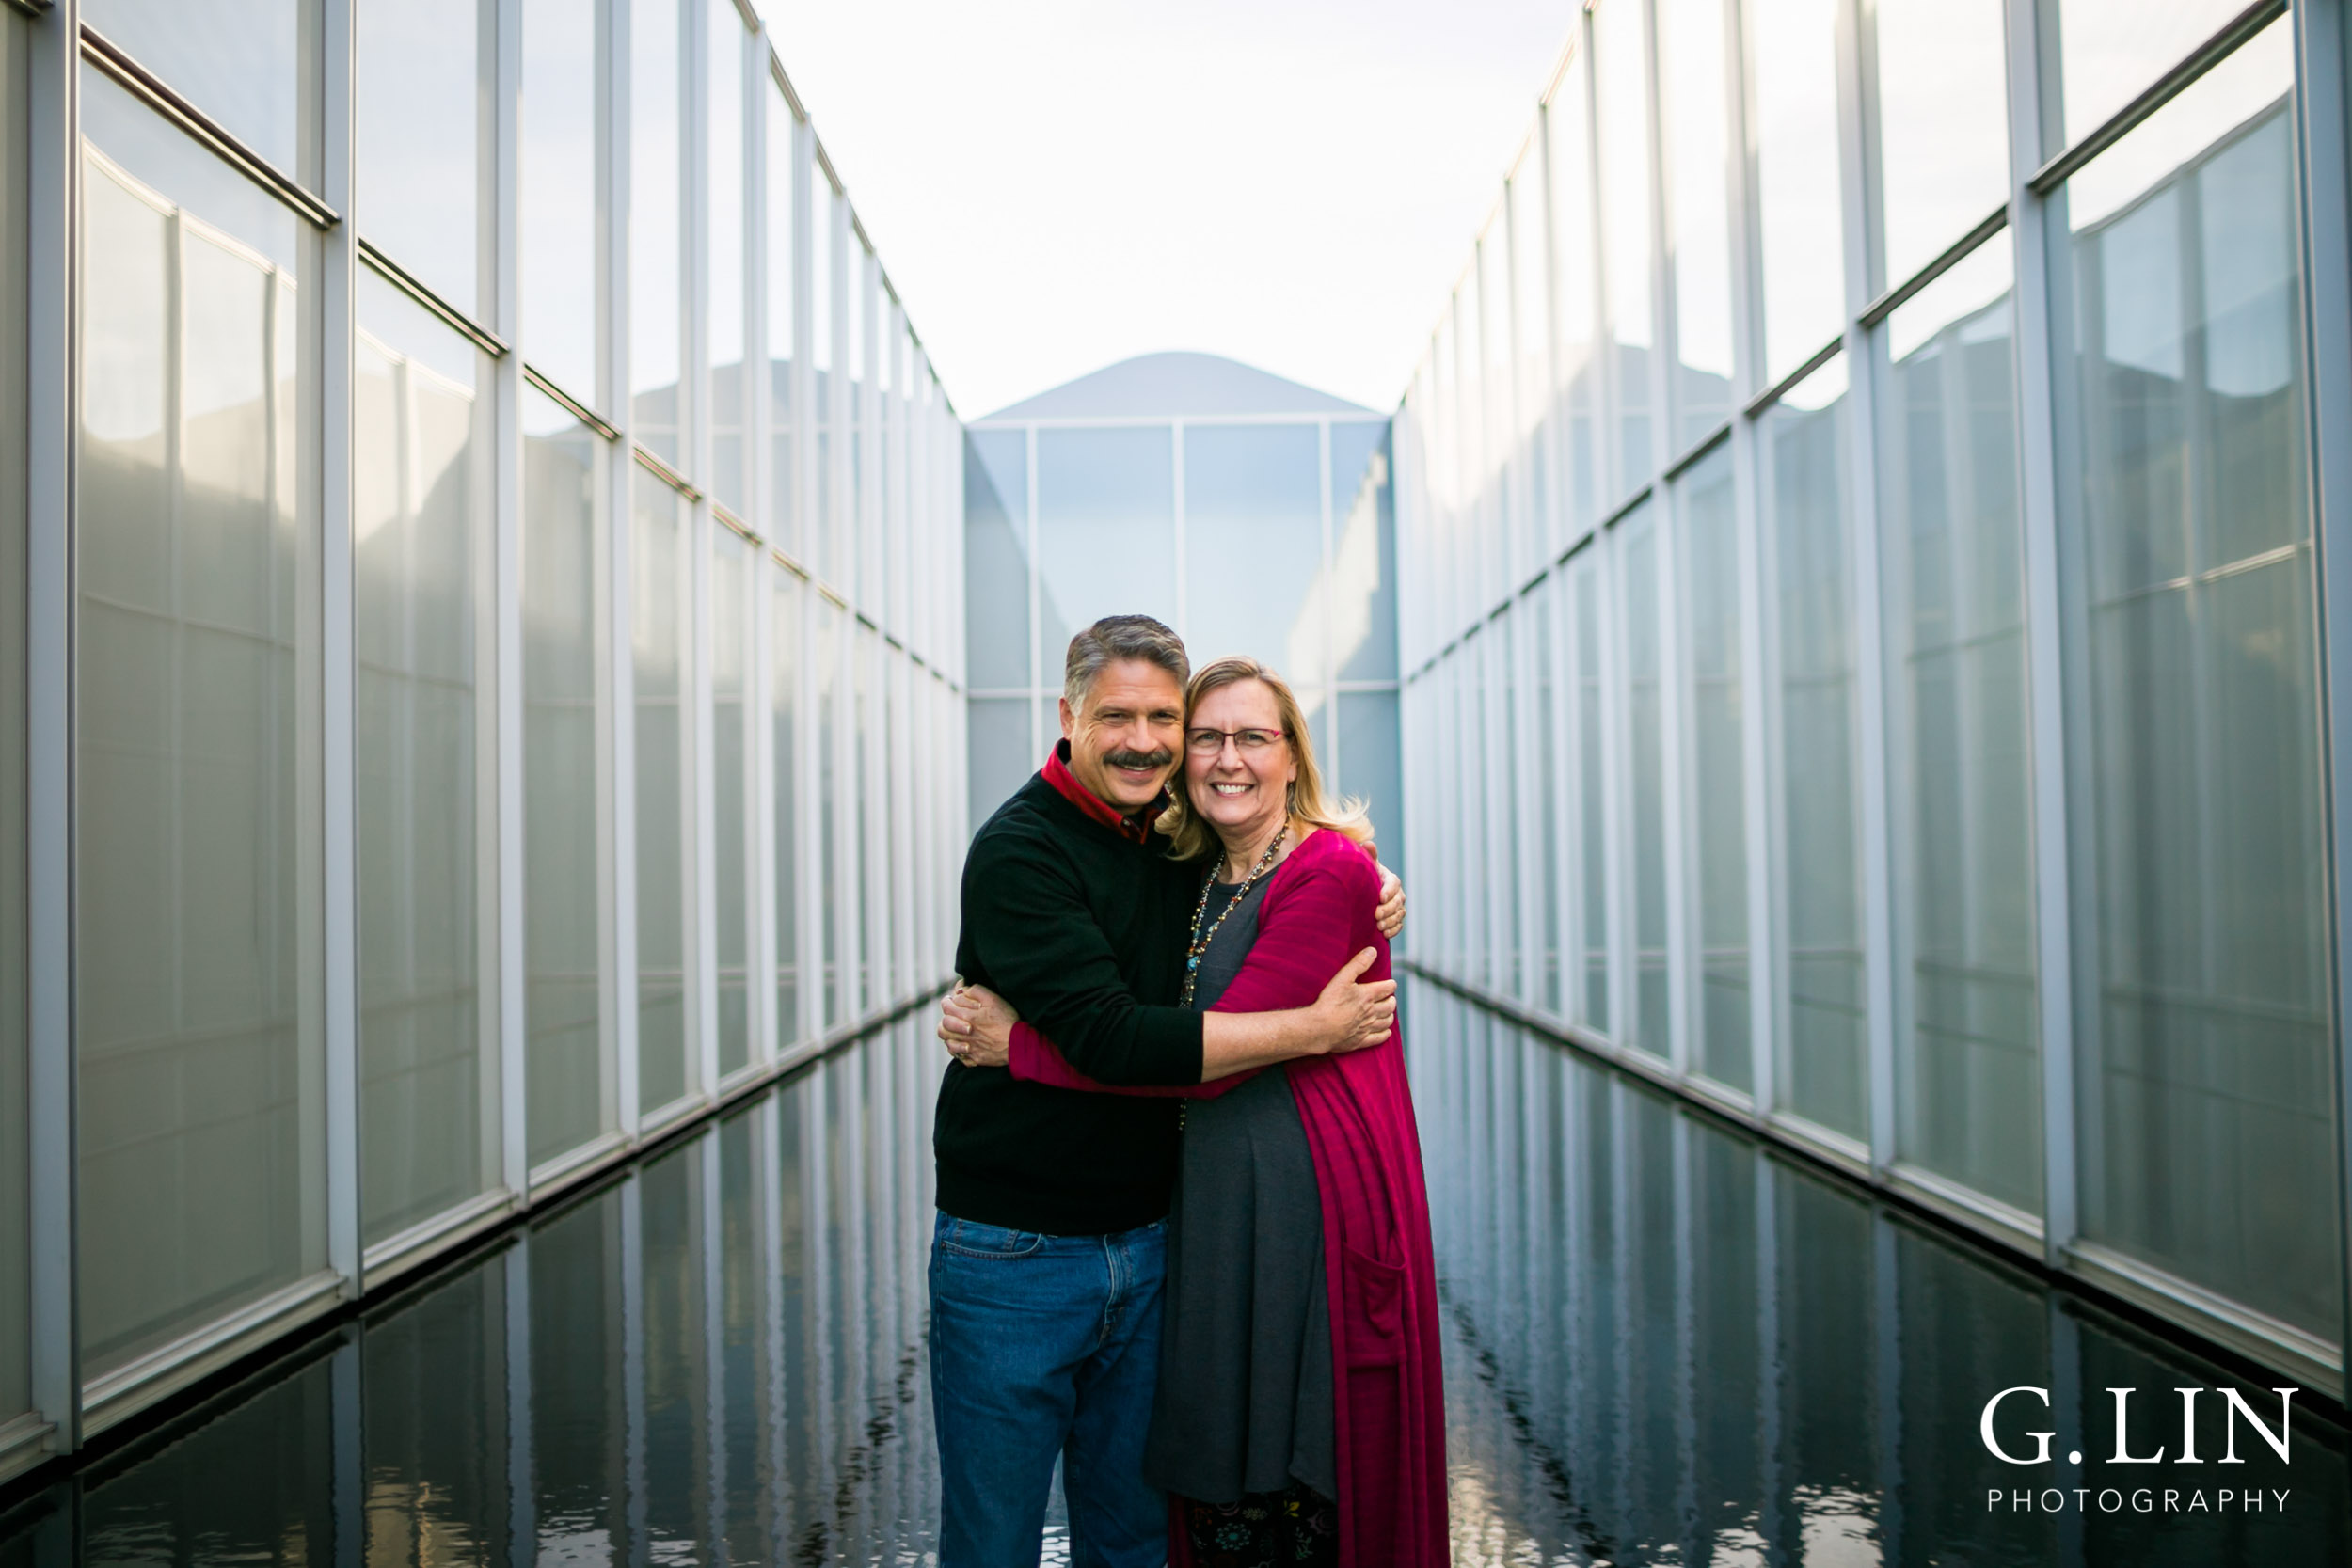 Raleigh Family Photographer | G. Lin Photography | Couple hugging each other at NCMA